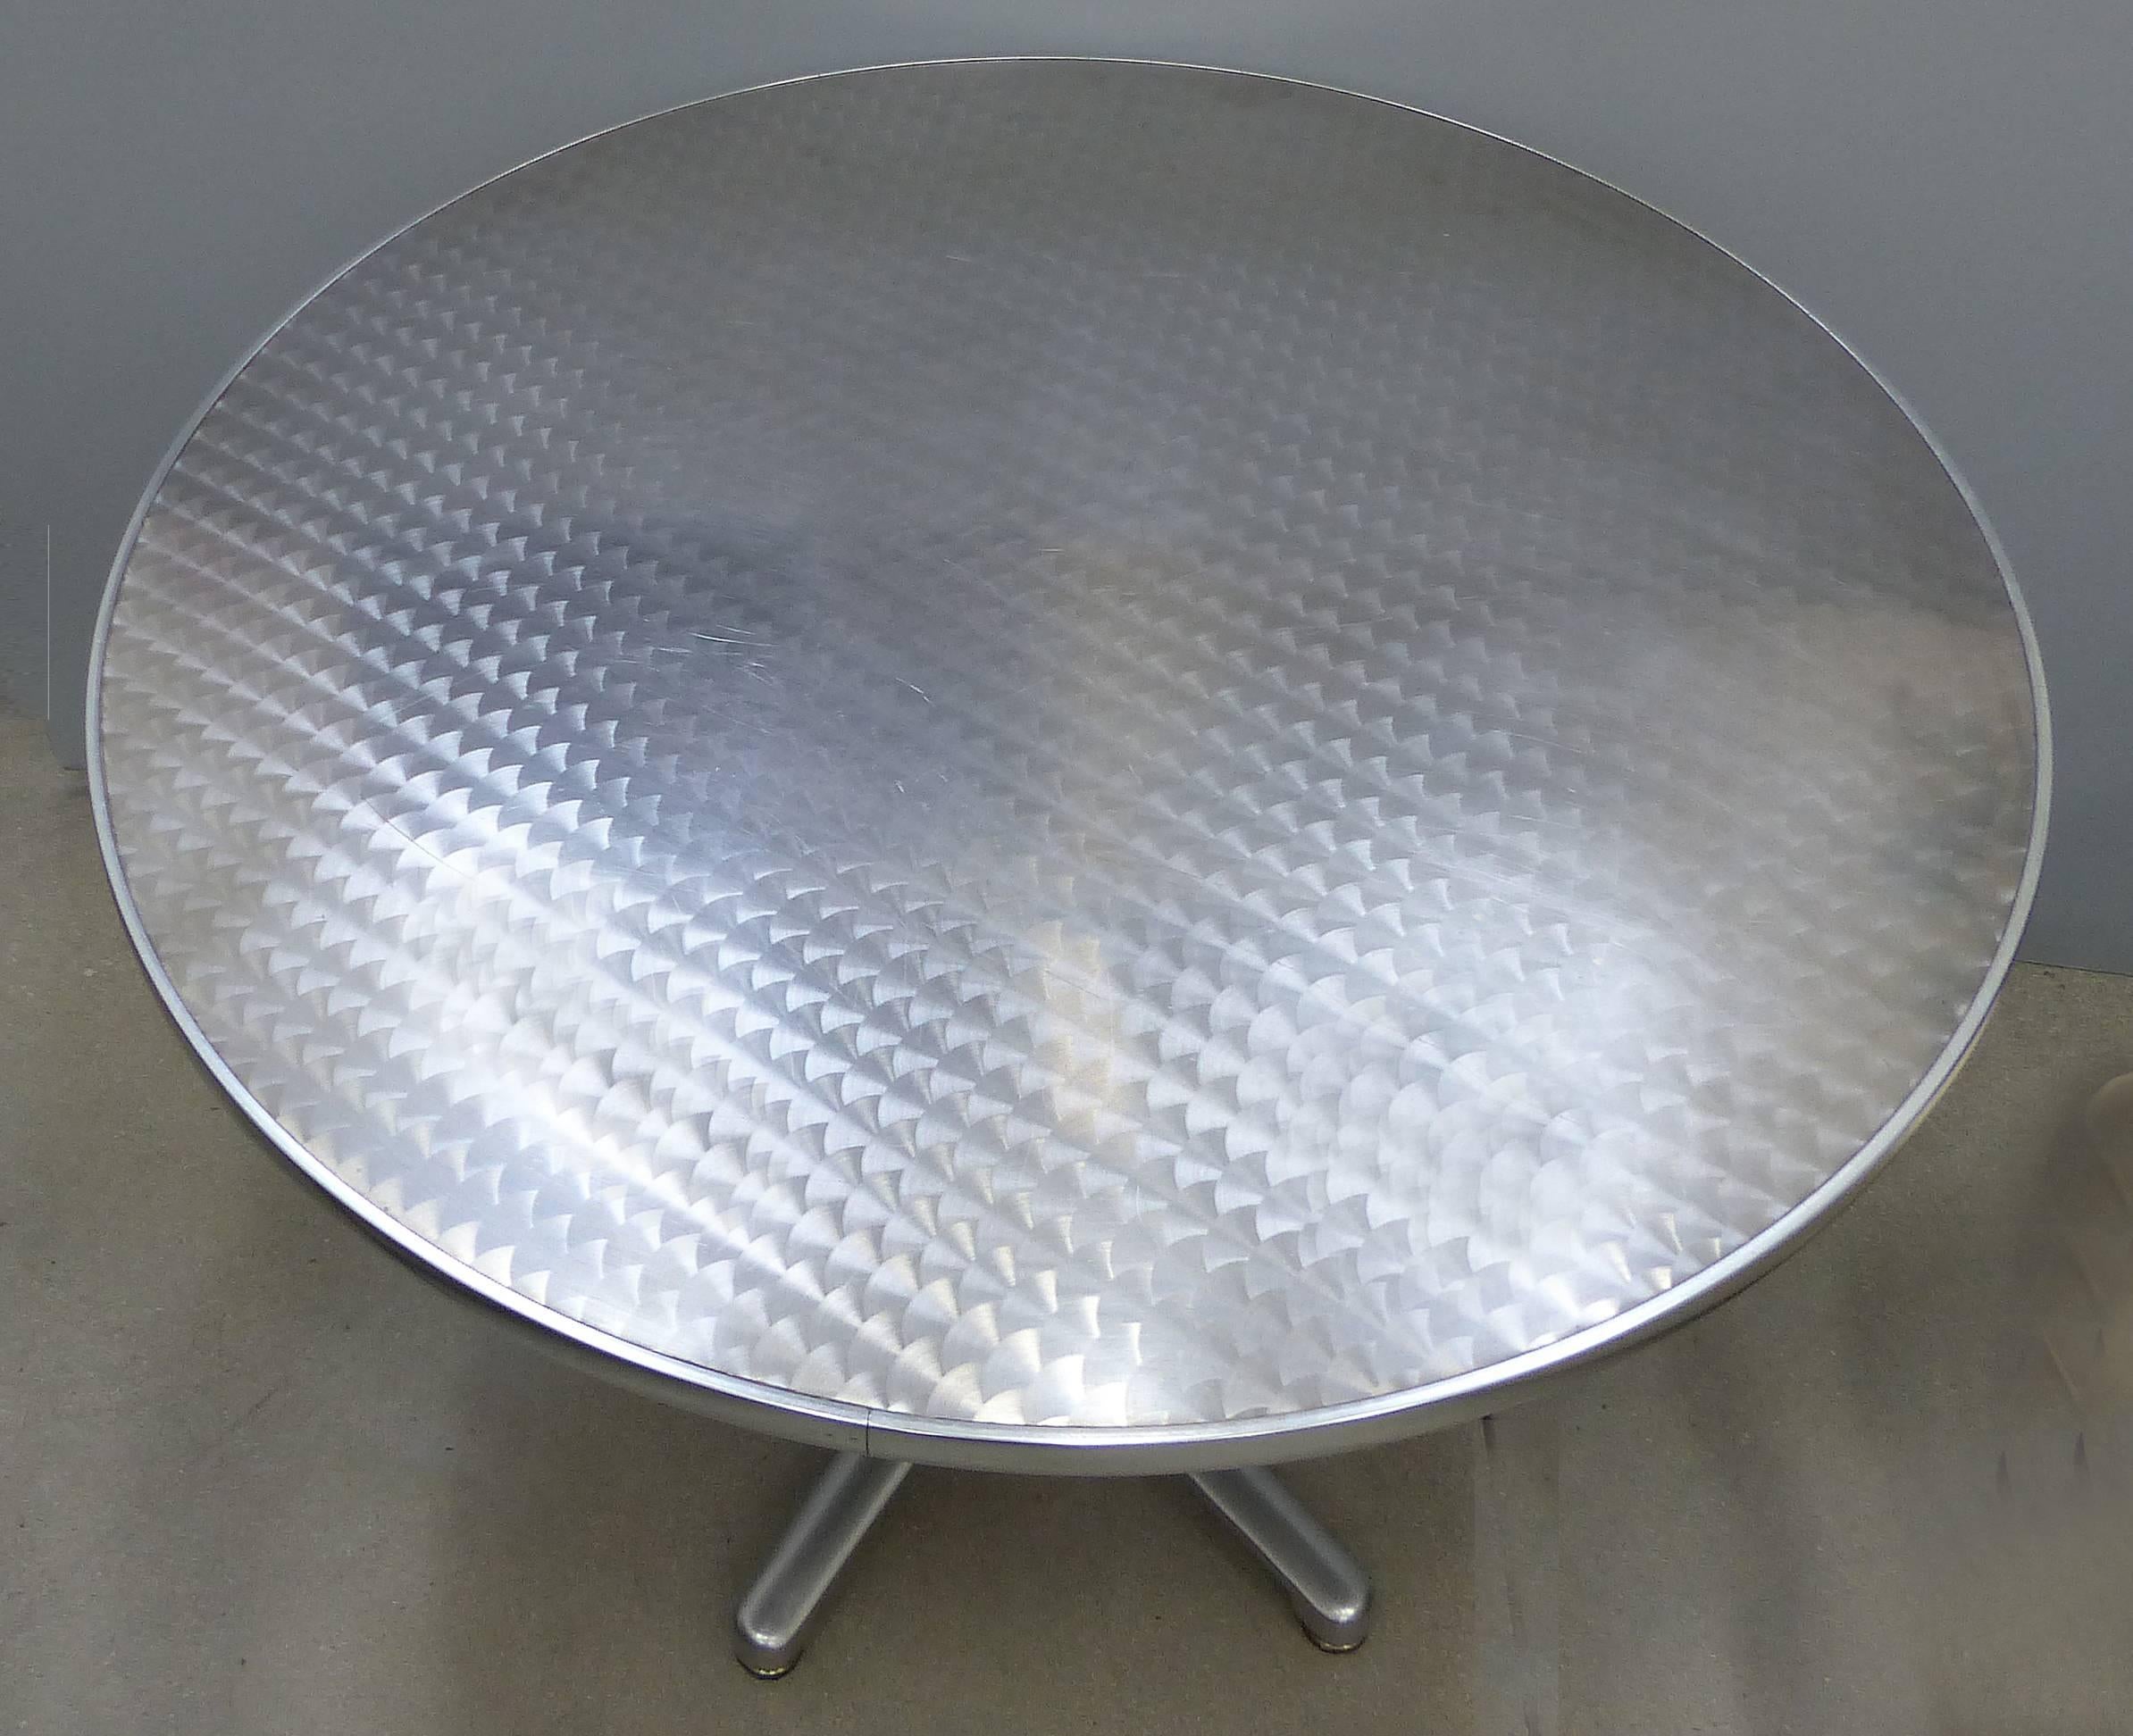 Jorge Pensi for Amat, SpainKnoll Aluminum Bistro Table

Offered for sale is a polished aluminum round bistro table with a cast aluminum base designed in 1988 by Argentinian designer Jorge Pensi from his Barcelona studio. This table was manufactured